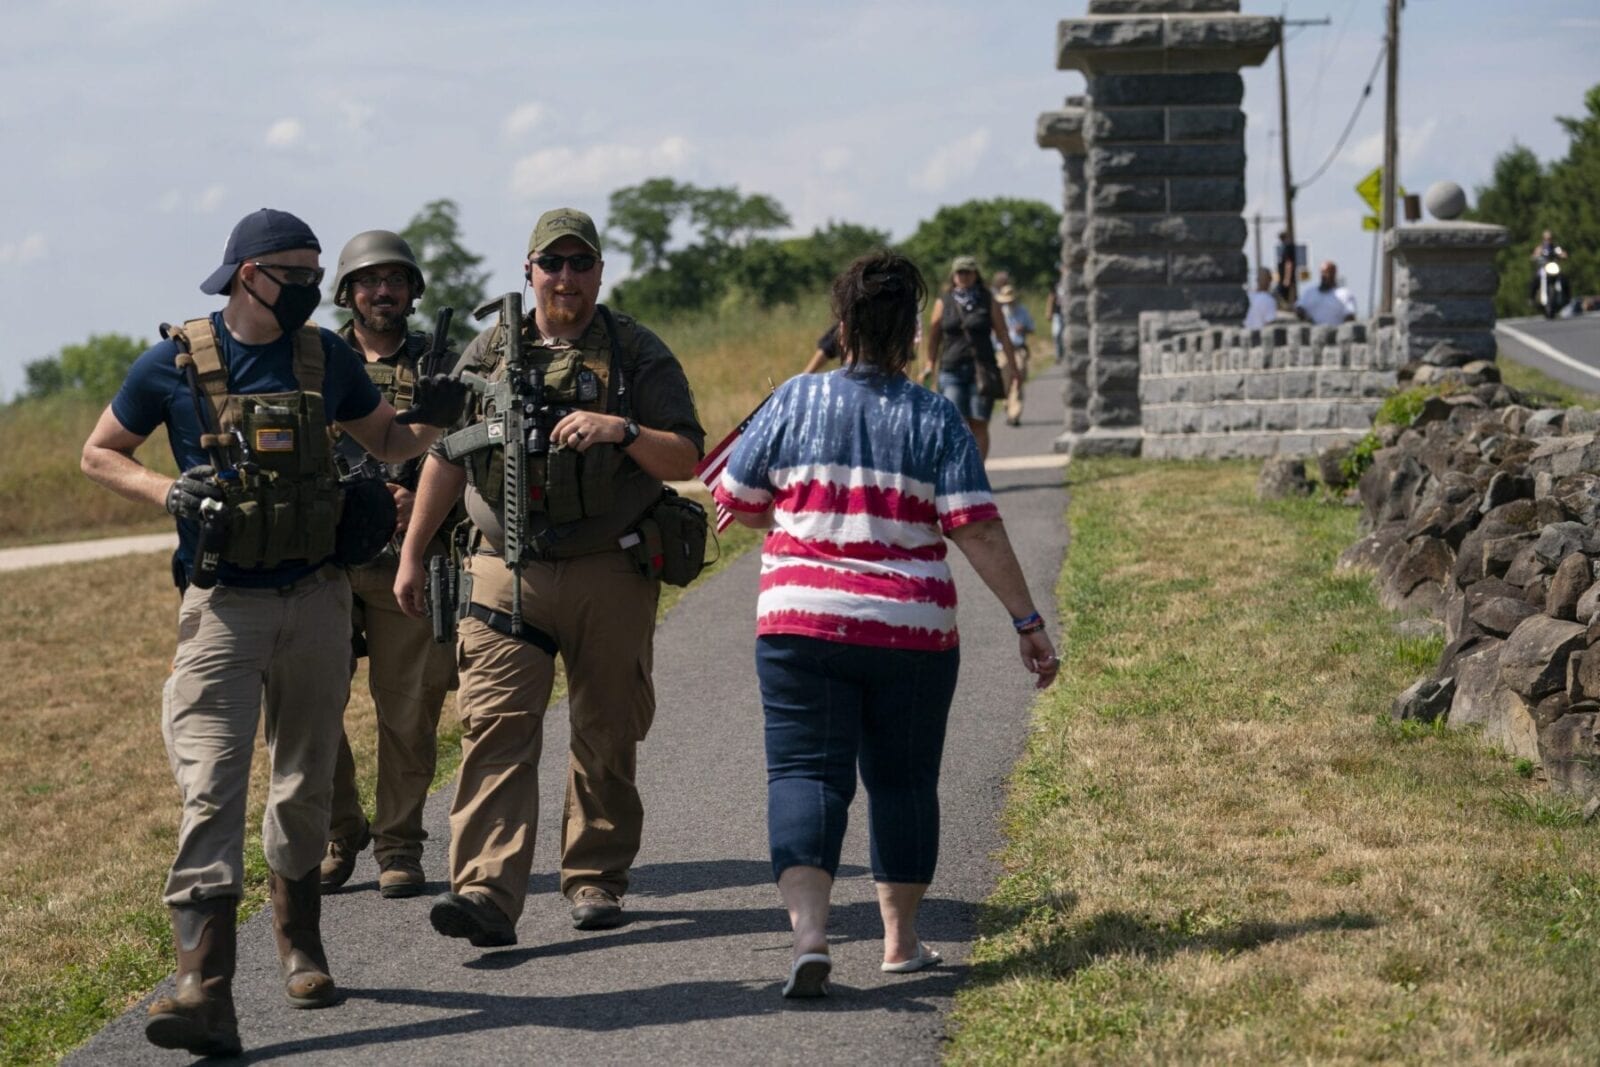 Members of a militia walk past a tourist as they patrol the area surrounding the Gettysburg National Cemetery on July 4, 2020, at Gettysburg National Military Park in Pennsylvania. (AP Photo/Carolyn Kaster) Self-described militia members flocked to Gettysburg amid rumors of an "antifada" flag burning — which the Washington Post later revealed as a hoax perpetrated by a man living in a small town north of Pittsburgh.